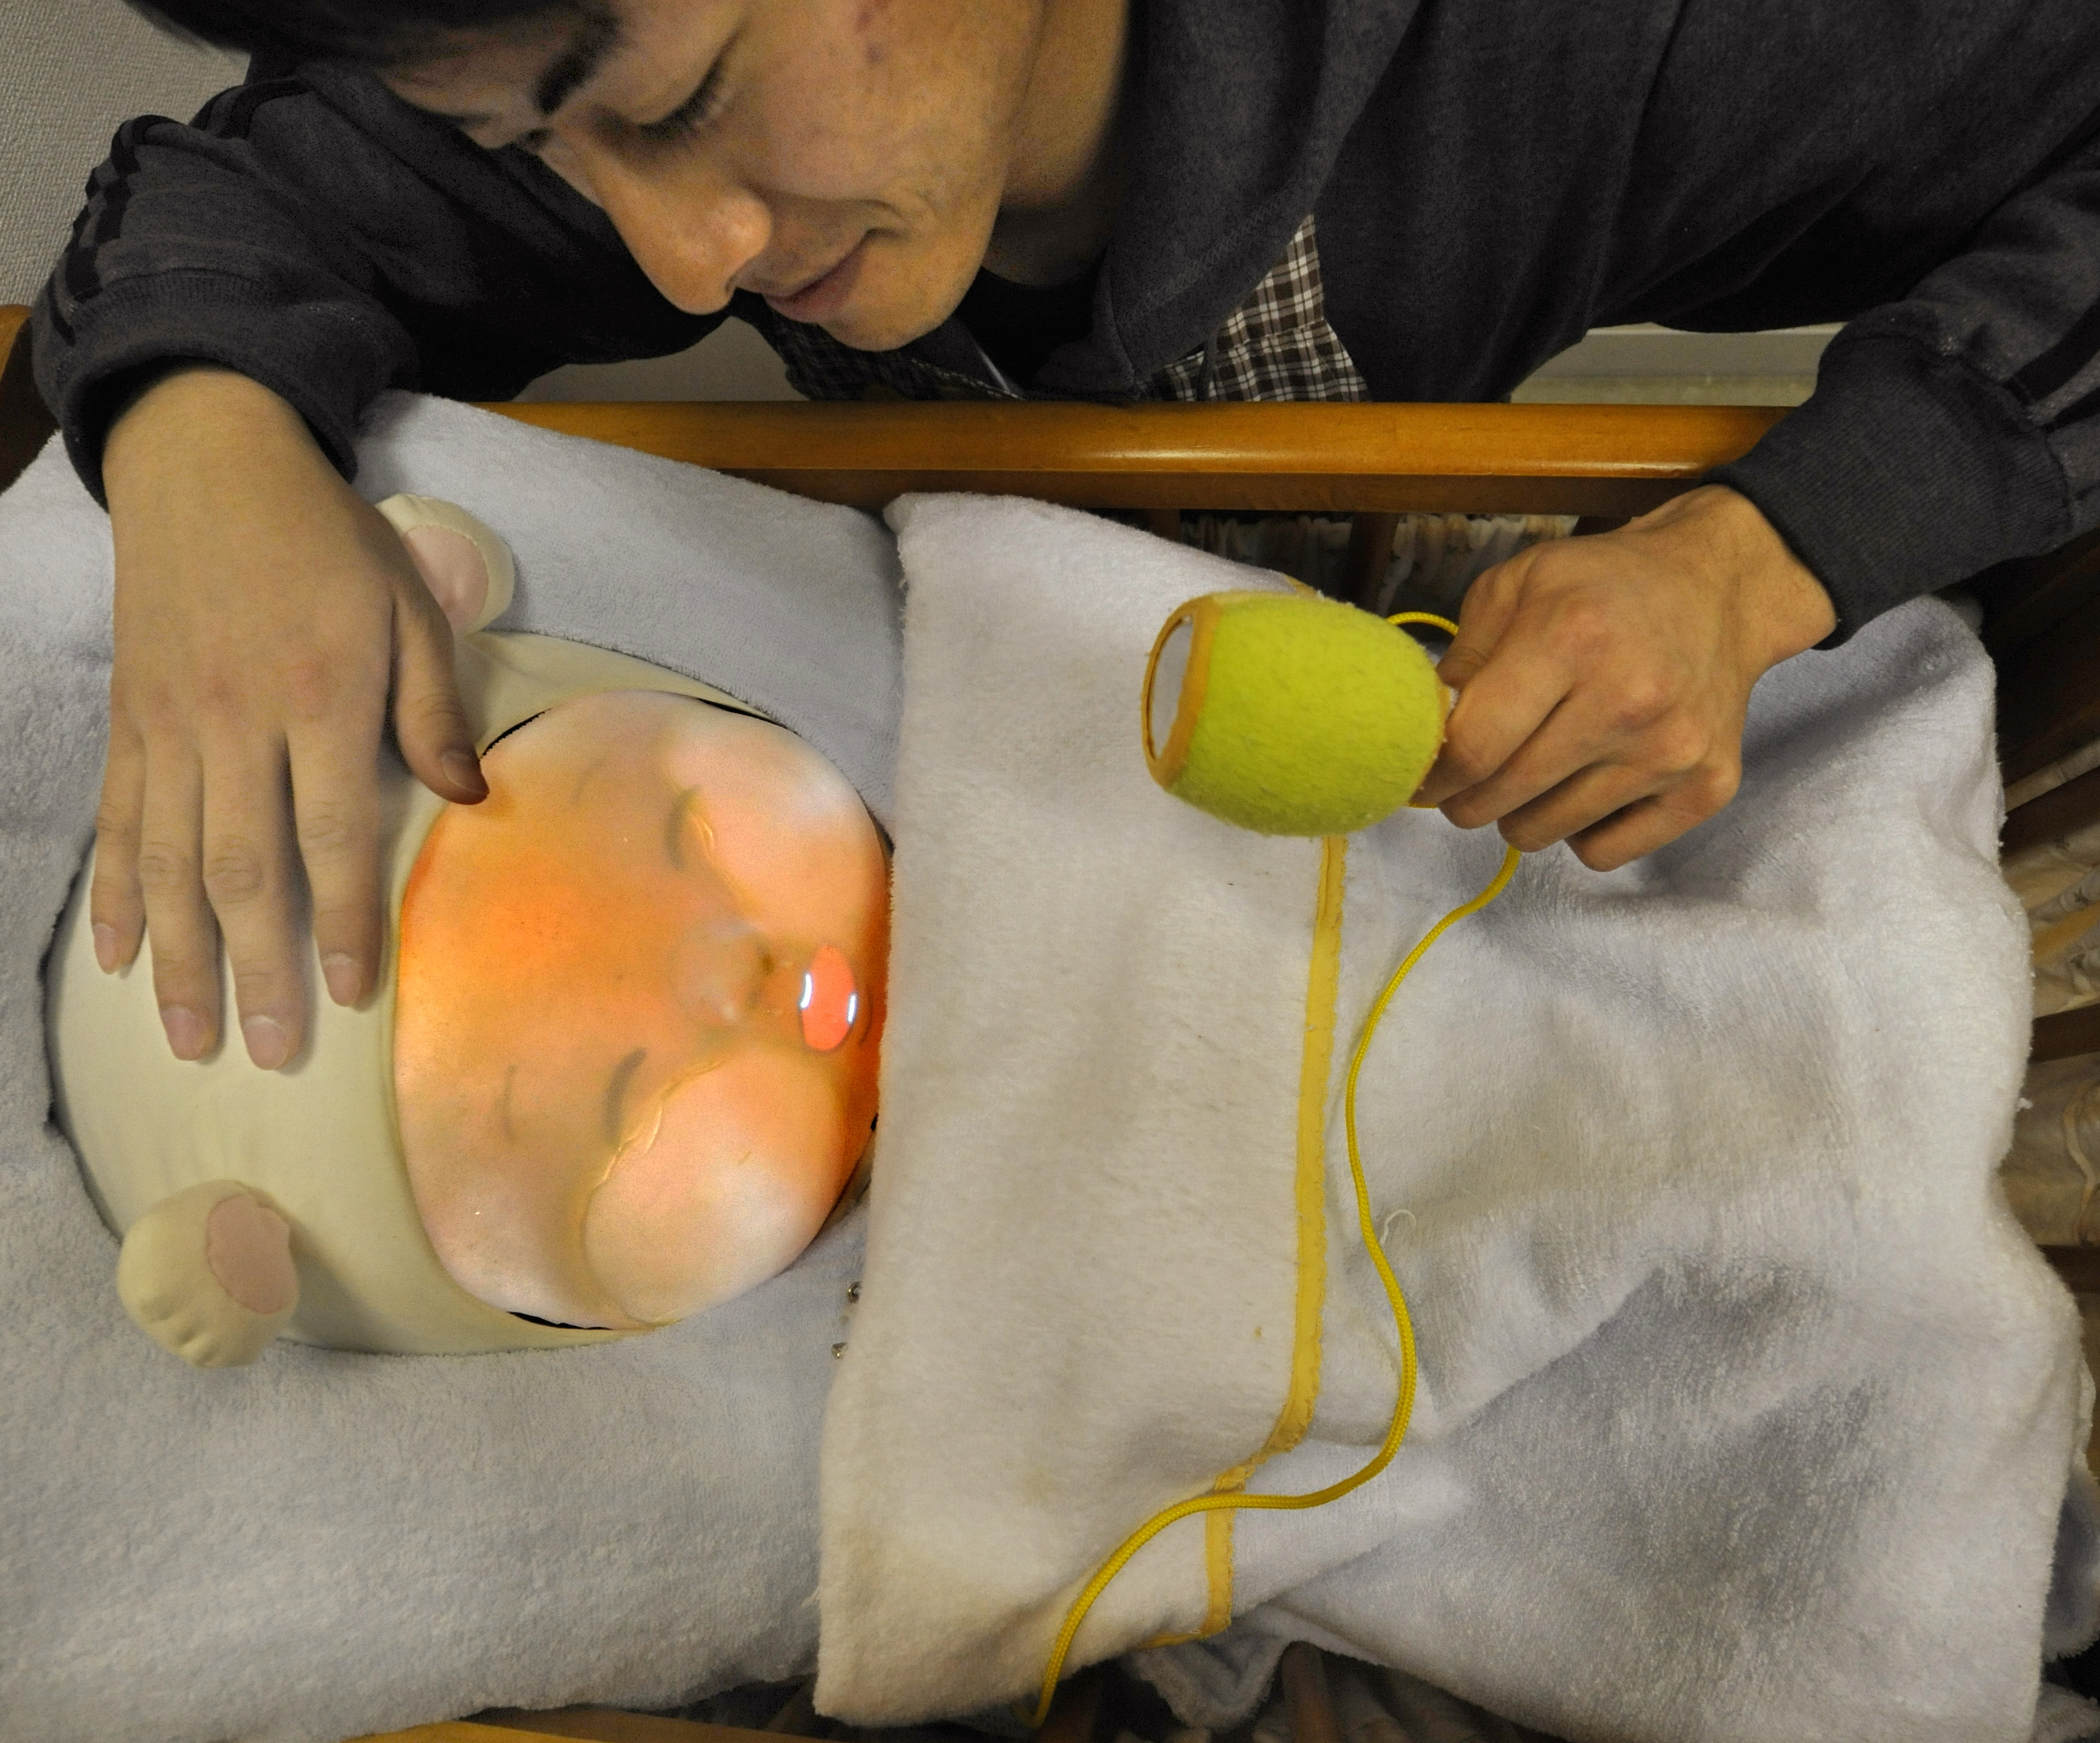 Tamura An engineering student soothes a baby robot during a presentations at a lboratory in Tsukuba University, Ibaraki Prefecture on February 12, 2010. (KAZUHIRO NOGI&mdash;AFP/Getty Images)